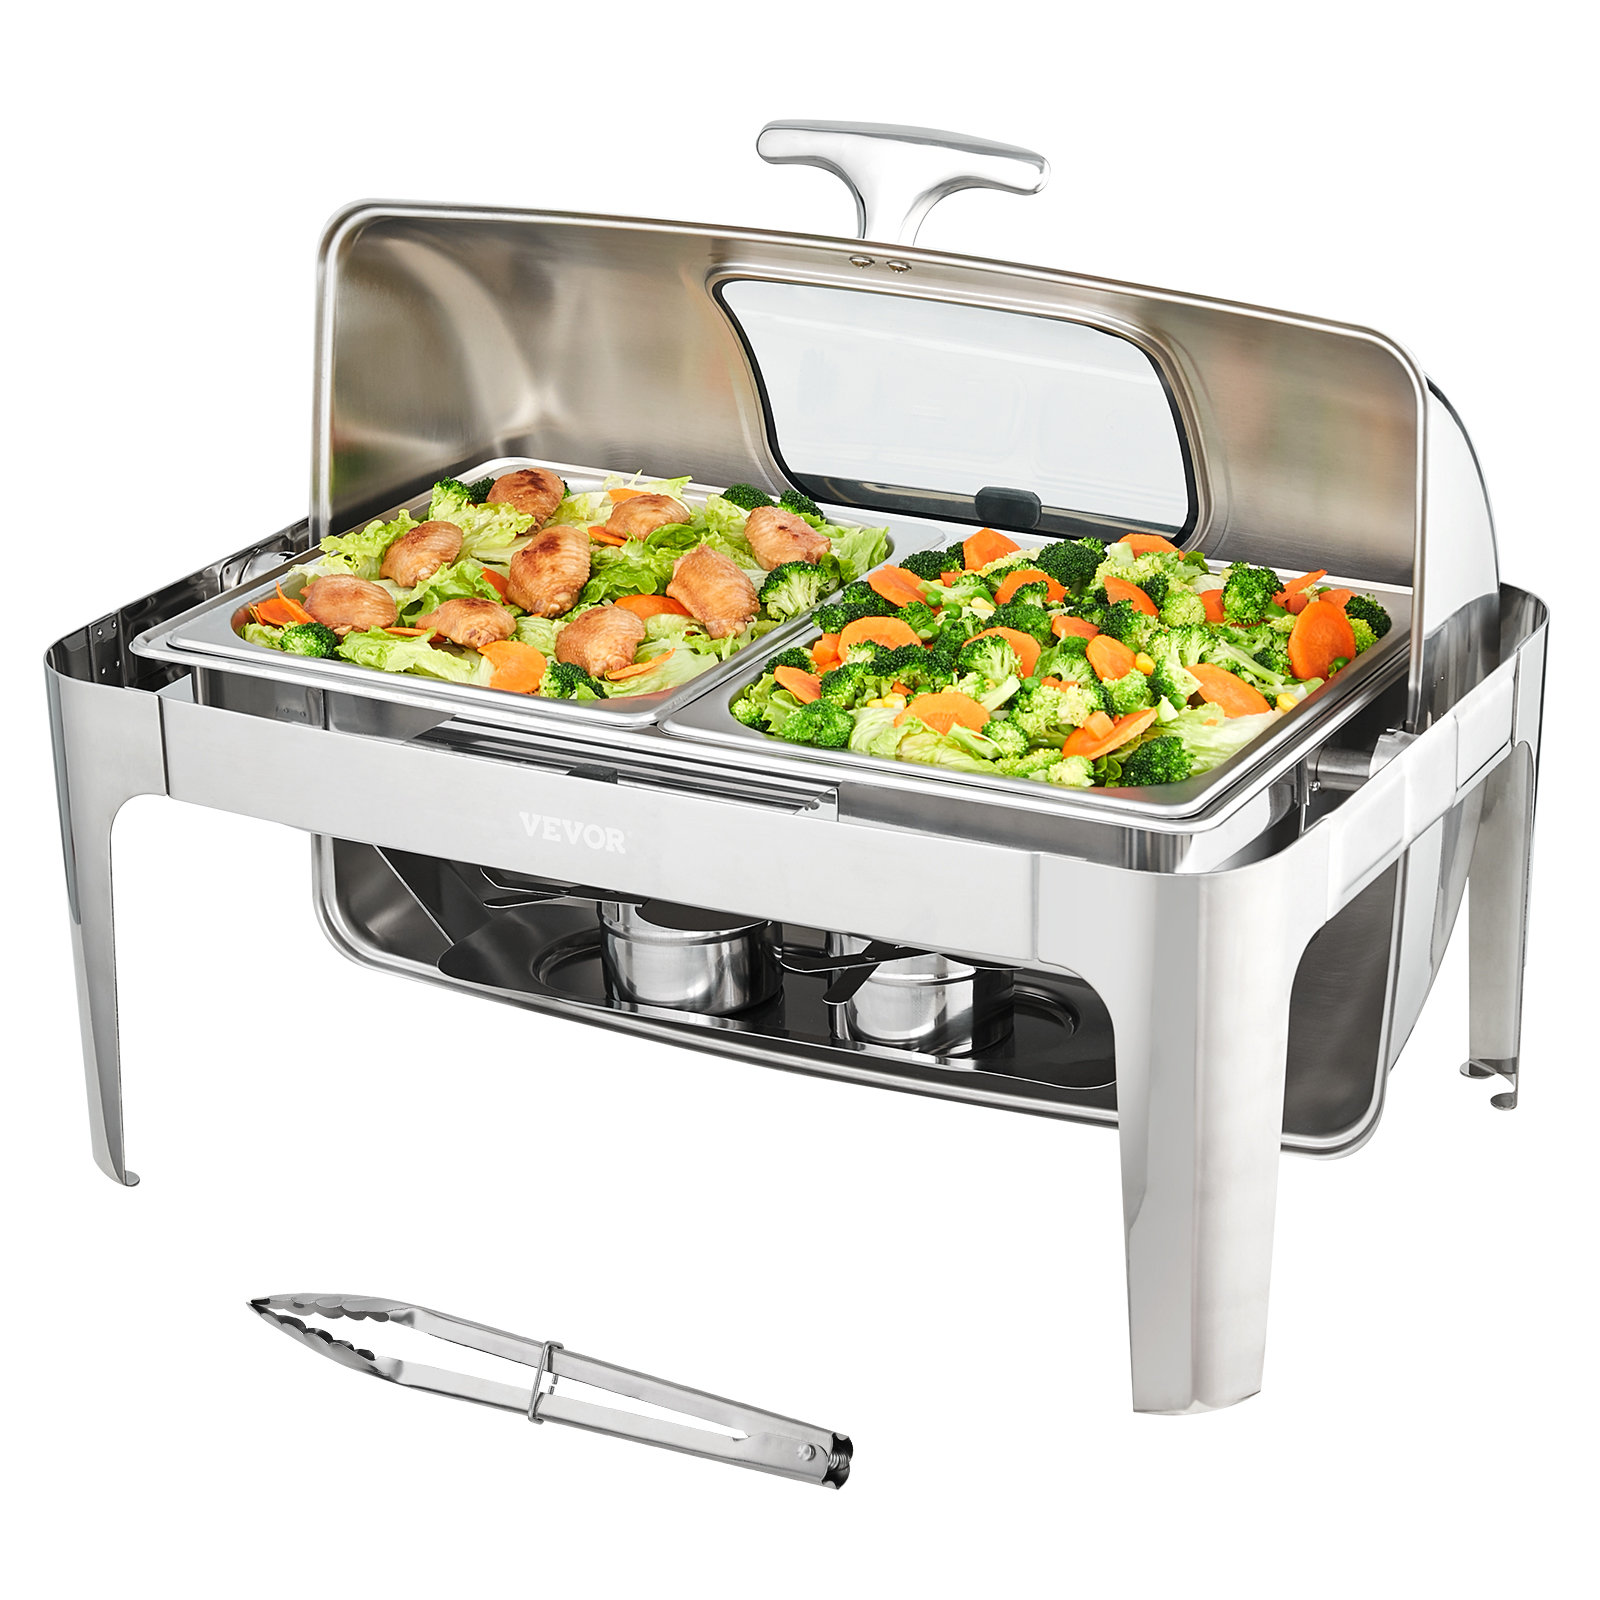 Prep & Savour 9 Quart Commercial Electric Chafing Dish Buffet Food Warmers